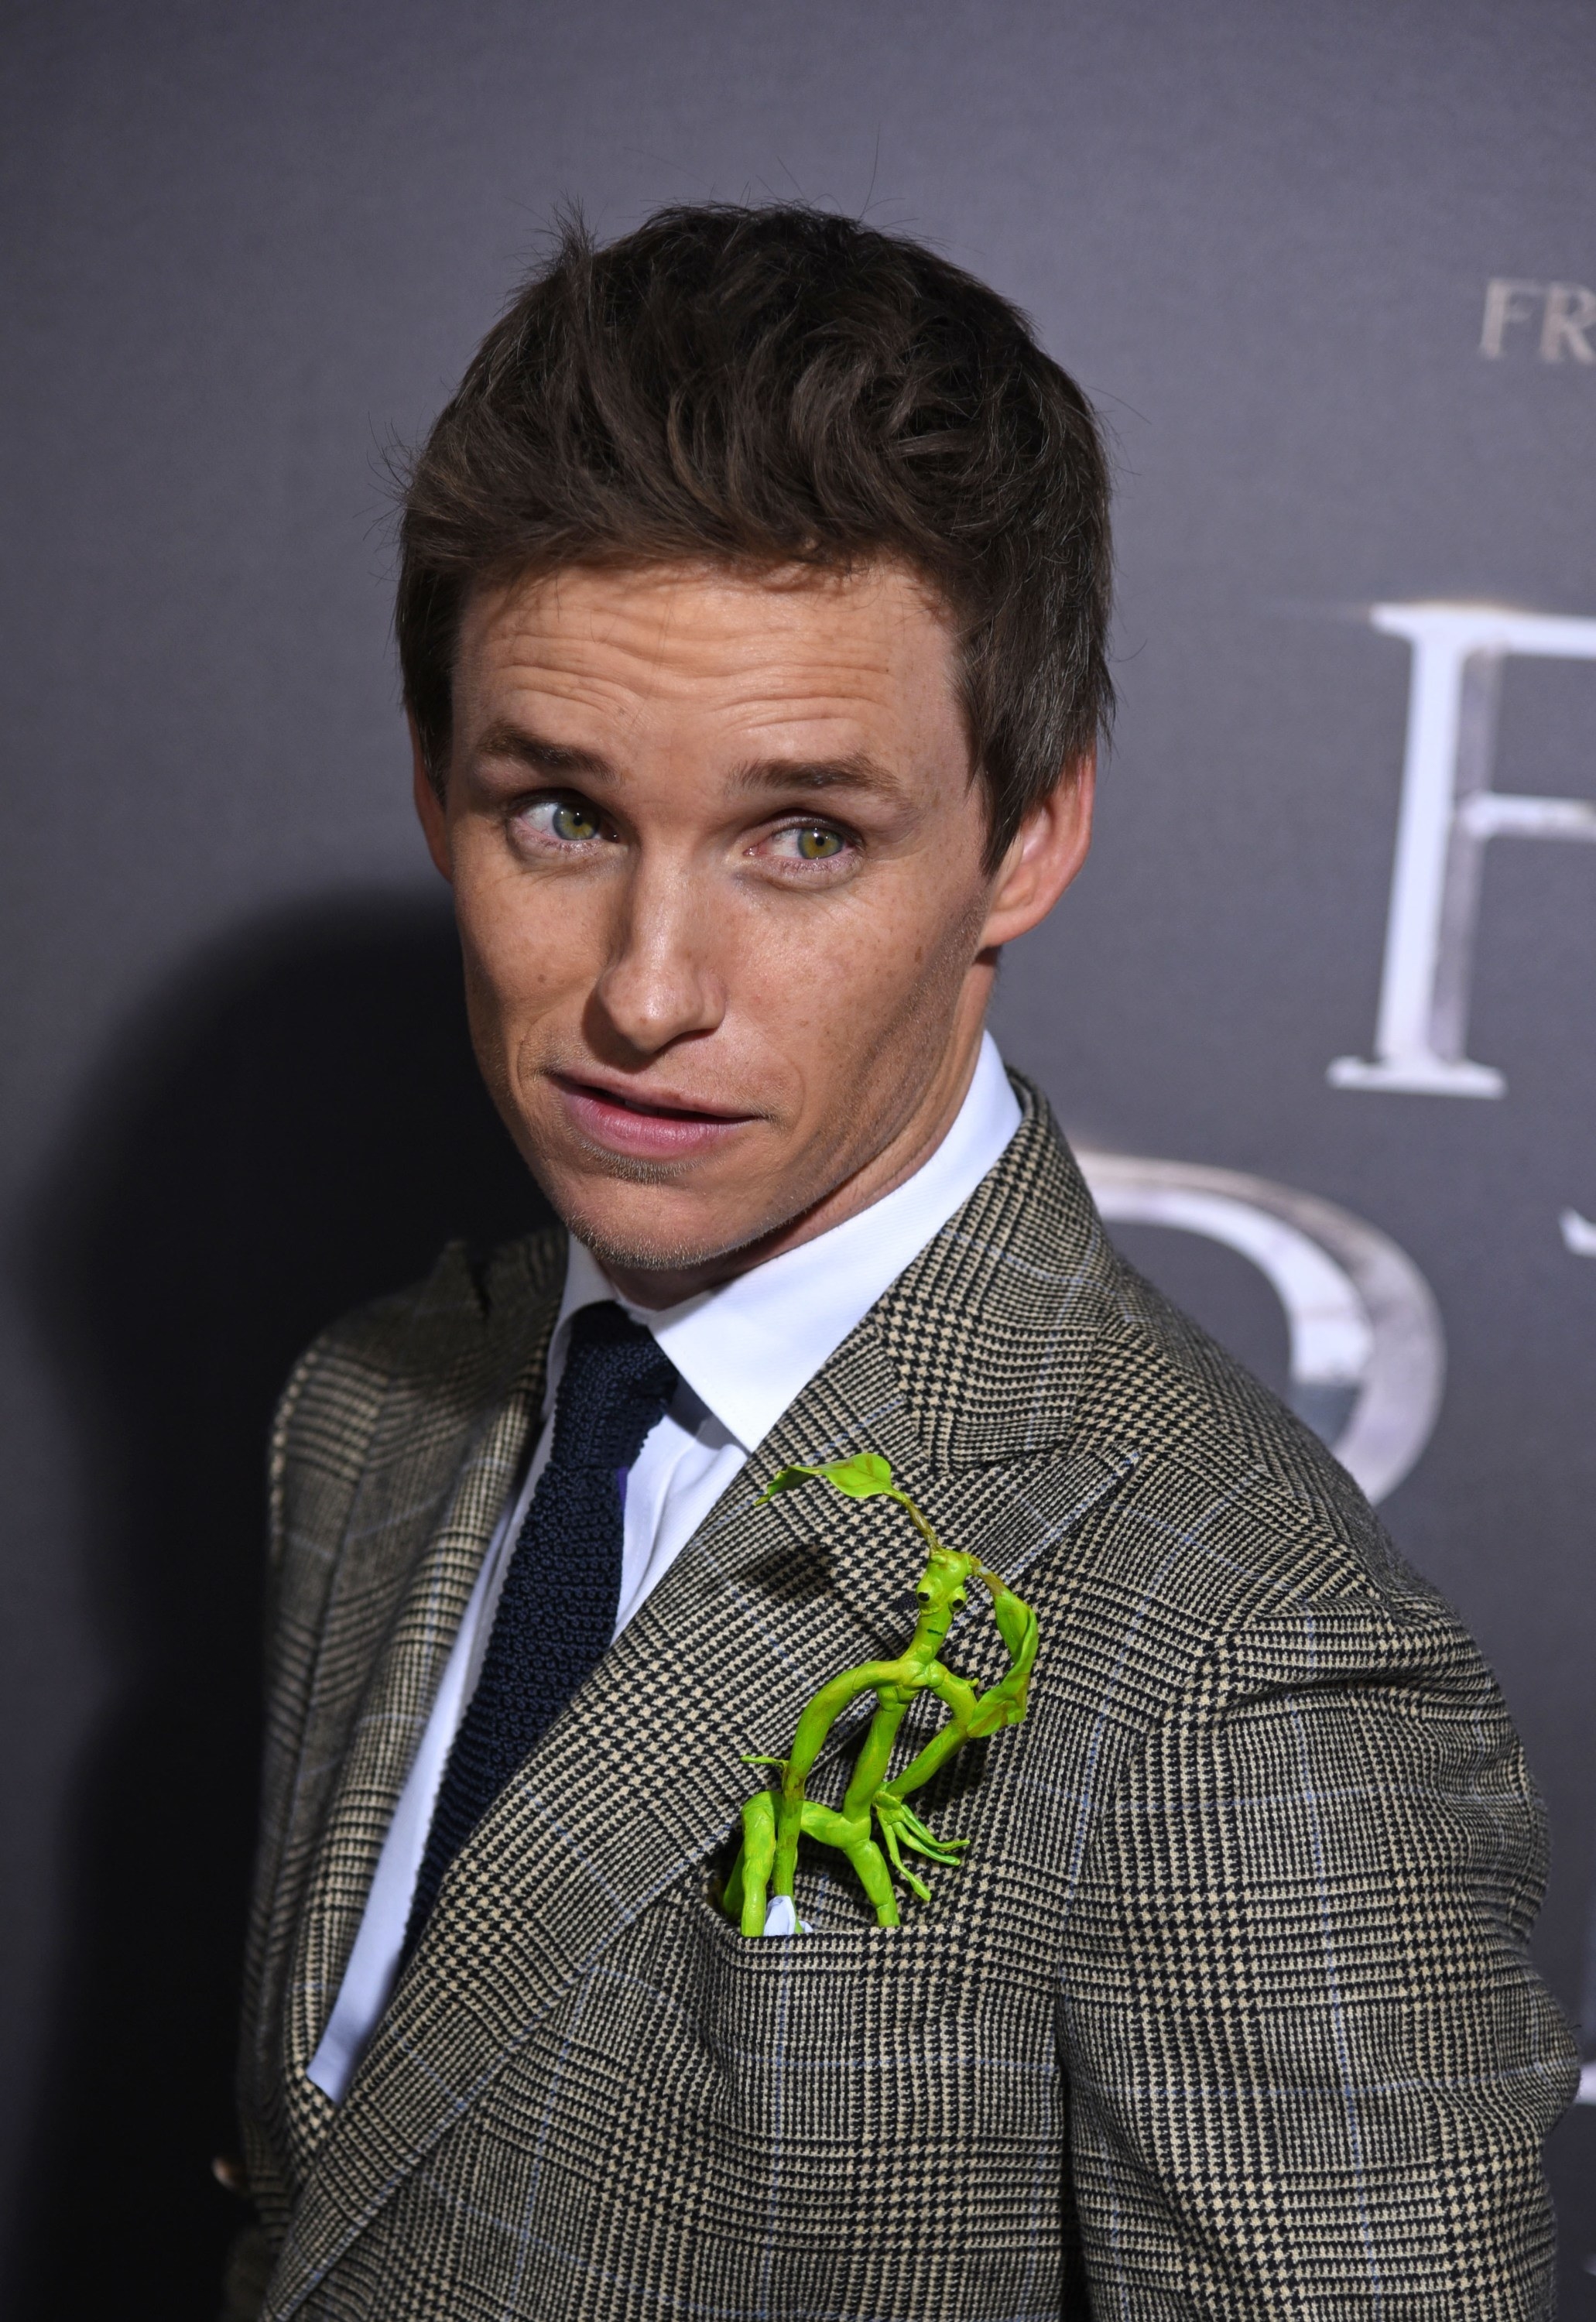 Eddie poses at a red carpet event with a toy version of the Bowtruckle, a fantastical beast, in his jacket pocket